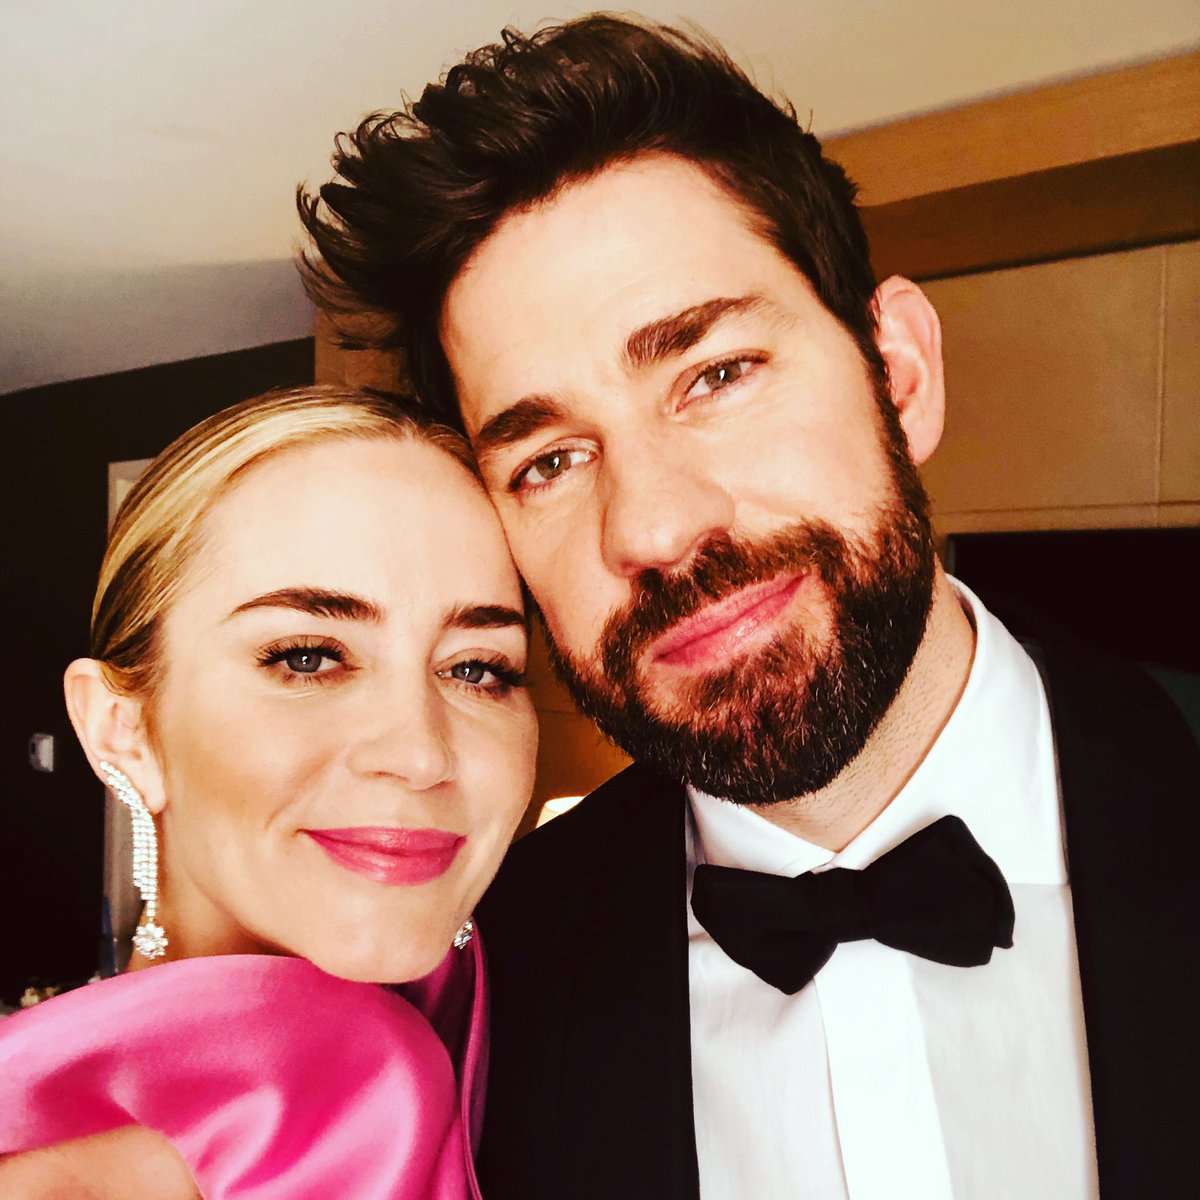 RT @johnkrasinski: Honored to be on the arm of this double nominee tonight! #SAGawards https://t.co/cmMAMDFVpg